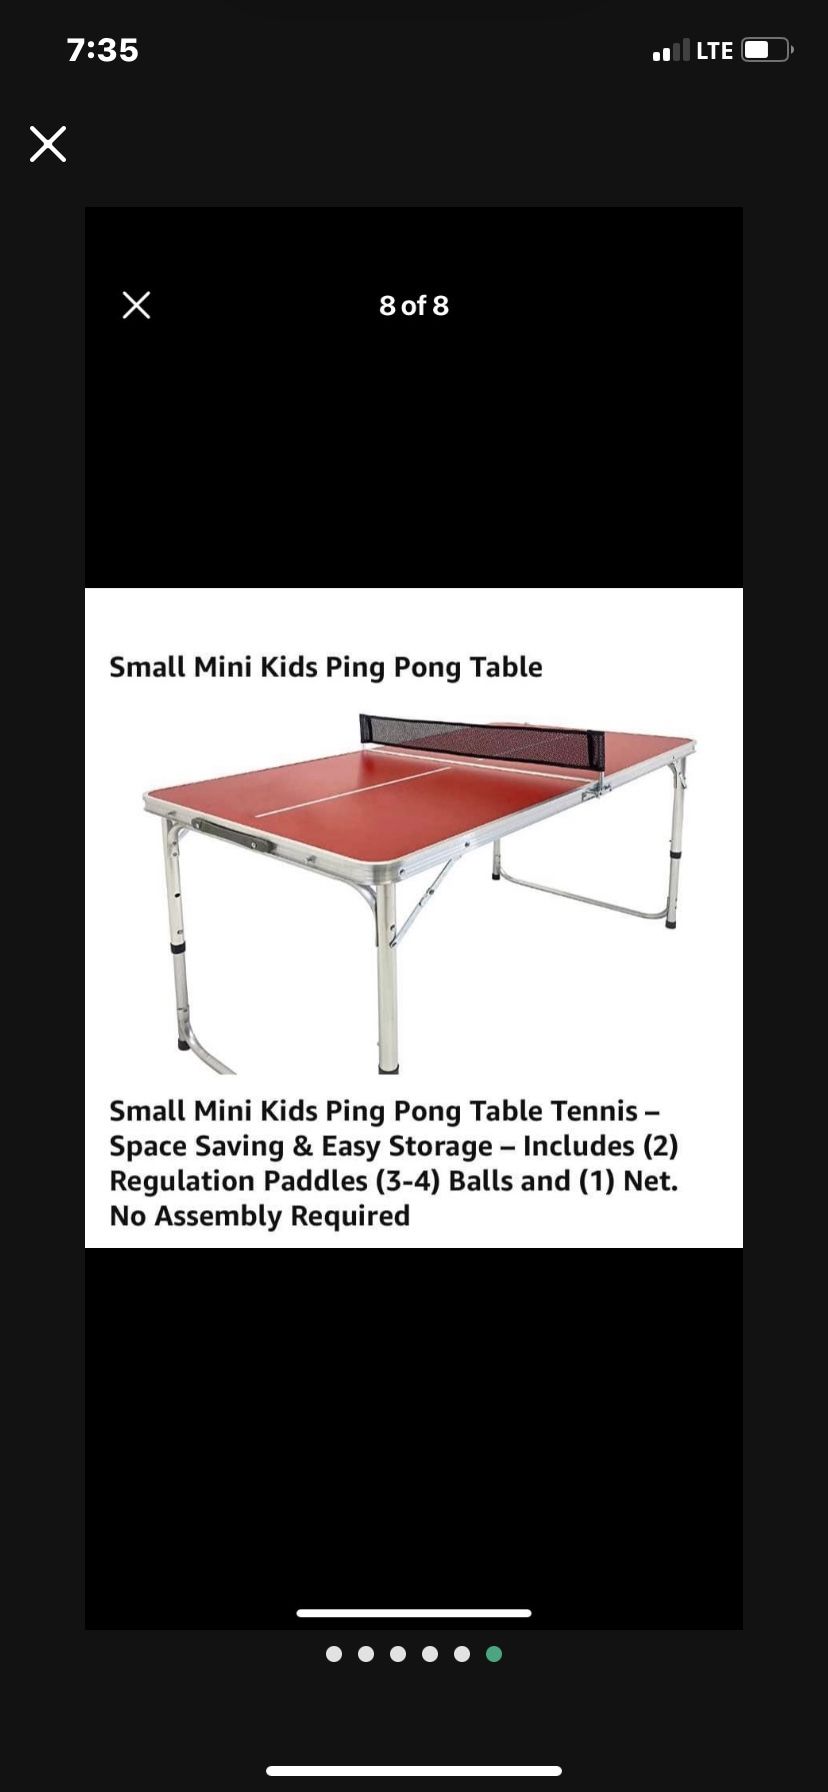 Ping Pong Table Tennis – Small Mini Kids - Space Saving & Easy Storage –  Includes (2) Regulation Paddles (3-4) Balls and (1) Net. No Assembly  Required